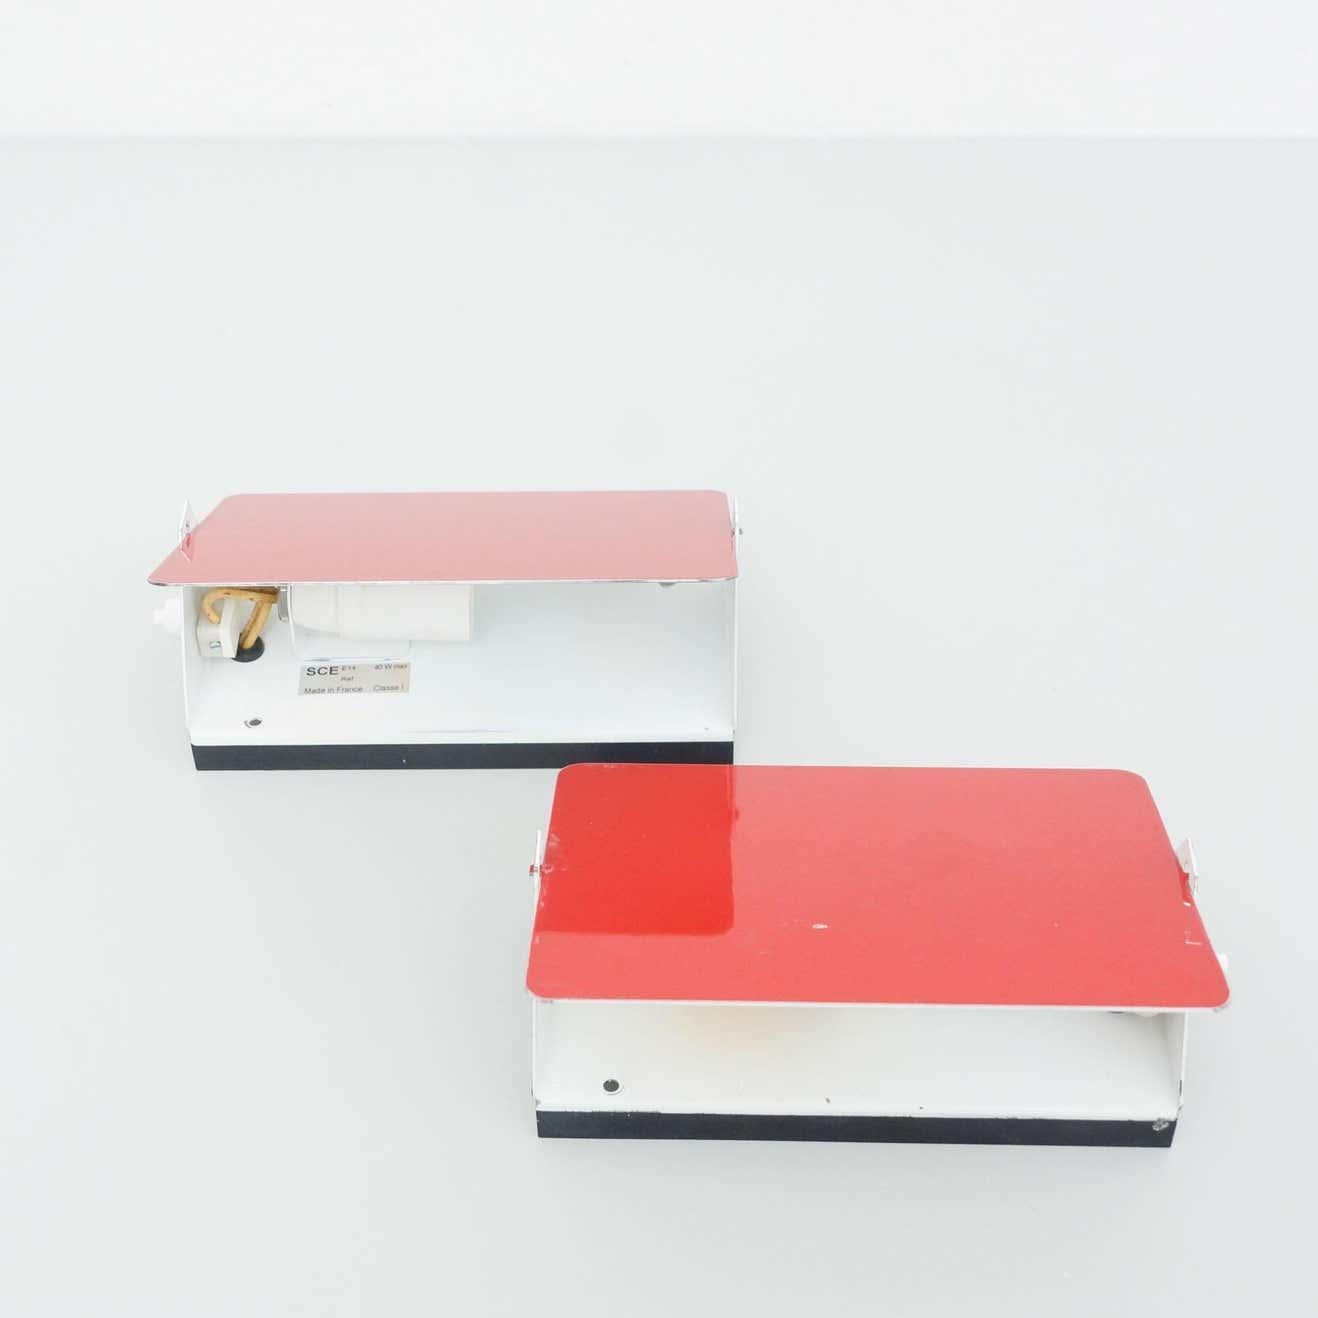 Pair of Charlotte Perriand, Mid-Century Modern Red Metal Cp-1 Wall Light, 1960 For Sale 6